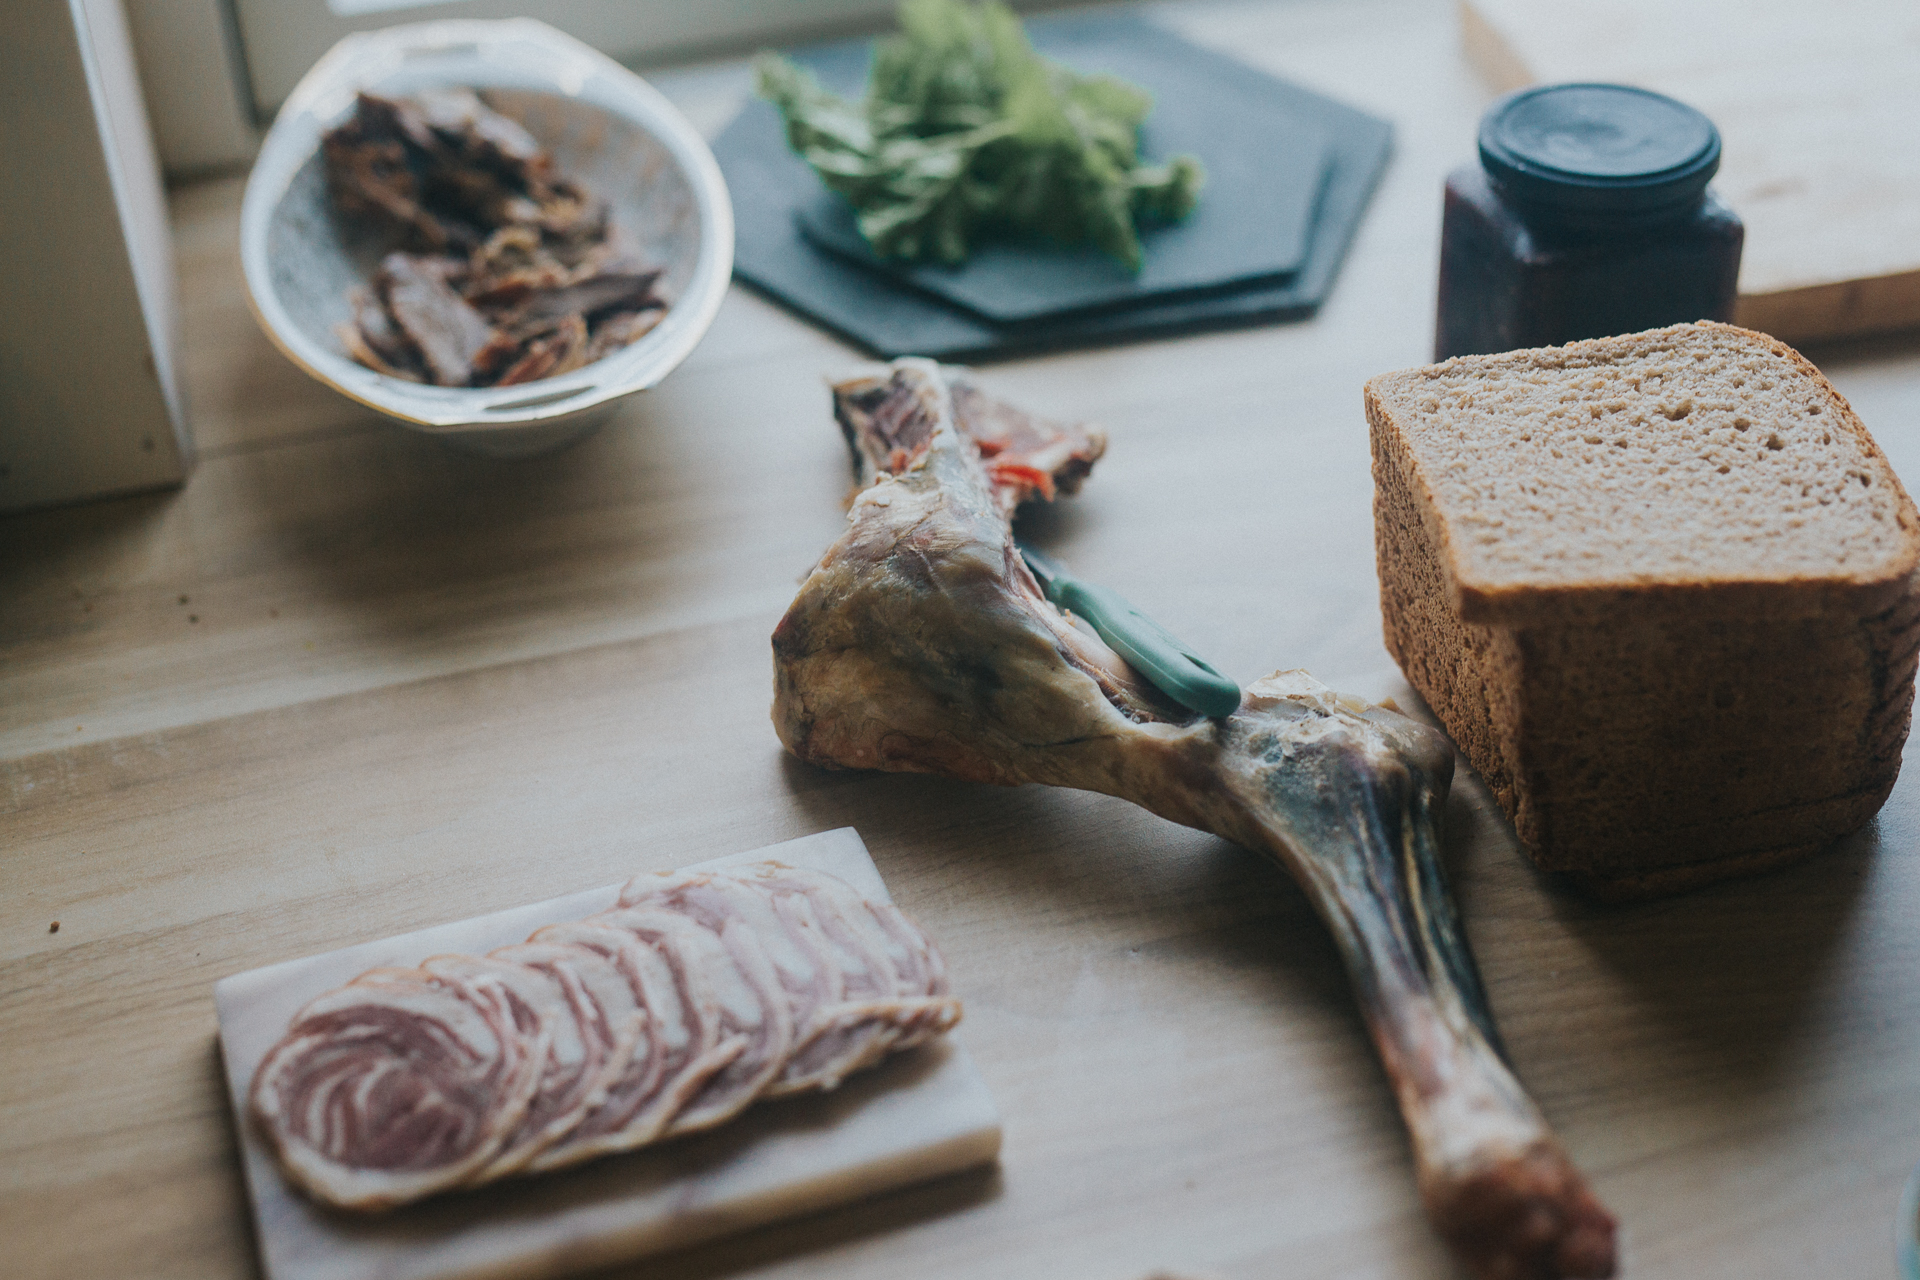  “By opening our hearts and our homes to people all over the world, we show them what basic farming and small village life is like.” We started with Faroese tapas- fermented and dried meats, halibut salad with fish caught by Harriet’s father, and homemade rhubarb jam with bread. 